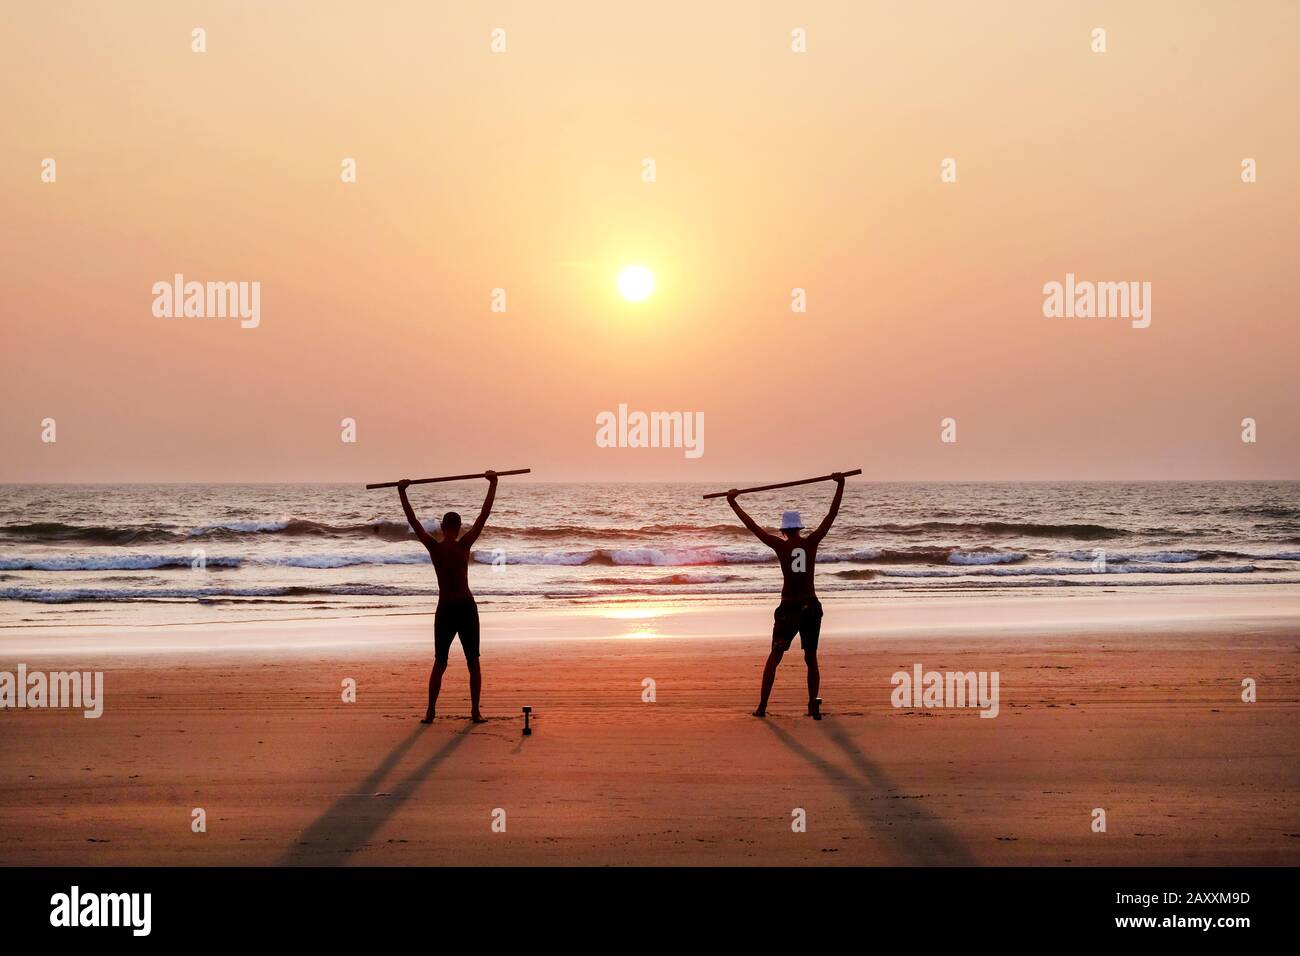 two unrecognizable men exercising at sunset by holding two wooden poles as weights on a wide open empty sandy beach, they are standing with their arms Stock Photo